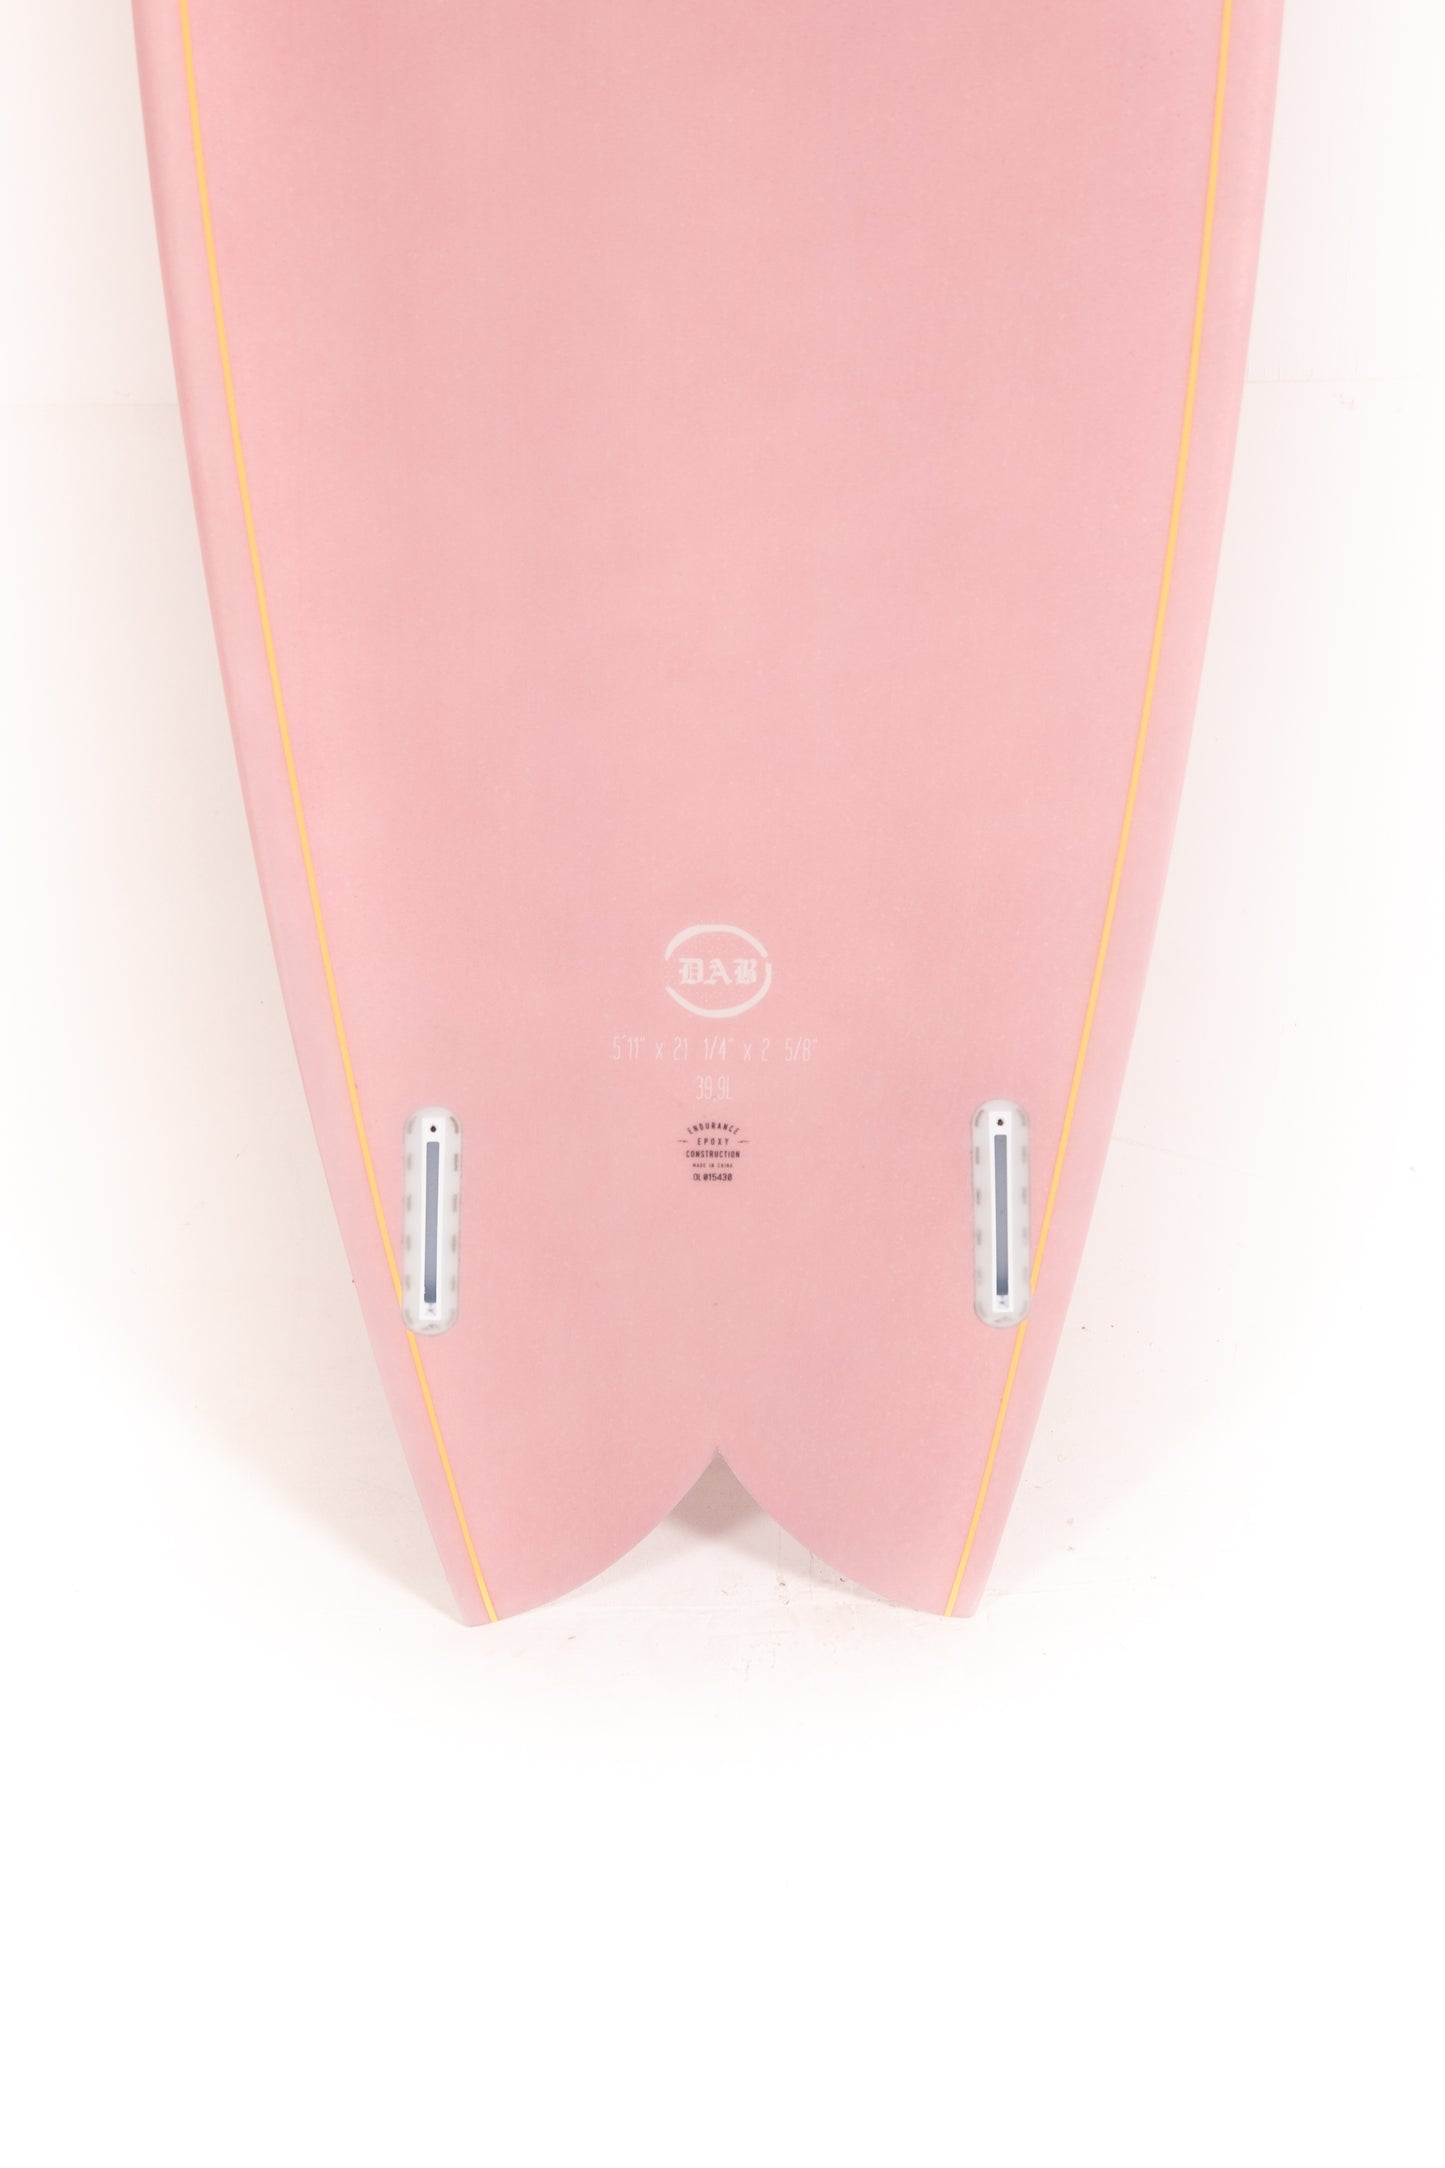 
                  
                    Pukas-Surf-Shop-Indio-Surfboards-Dab-pink-5_11
                  
                